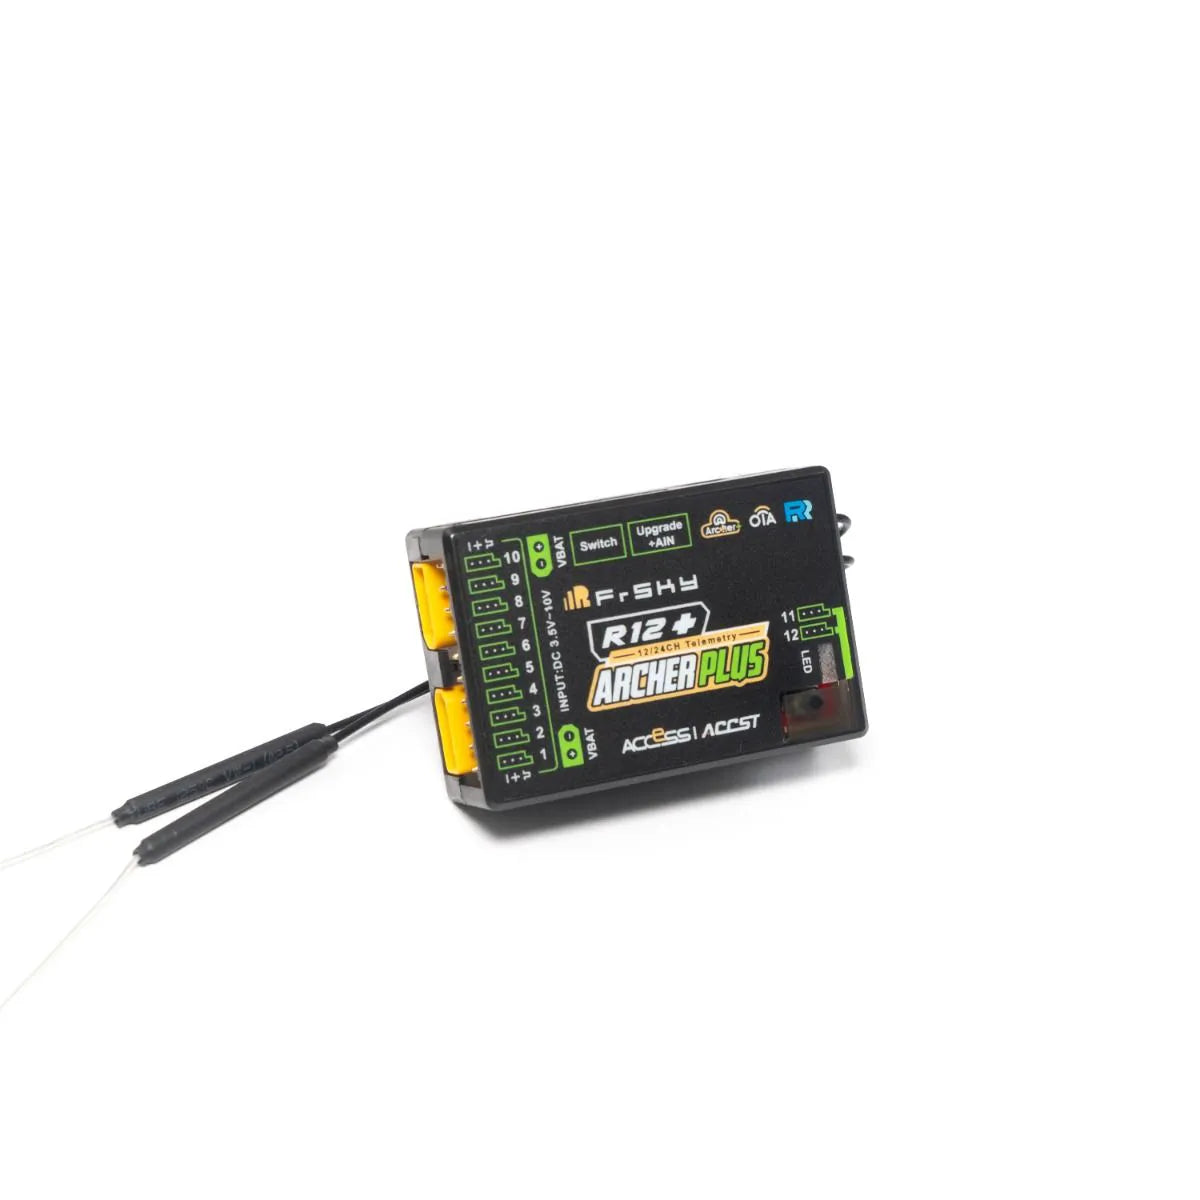 [03020118] FrSky ACCESS Archer Plus R12 Receiver with 12 Channel Ports